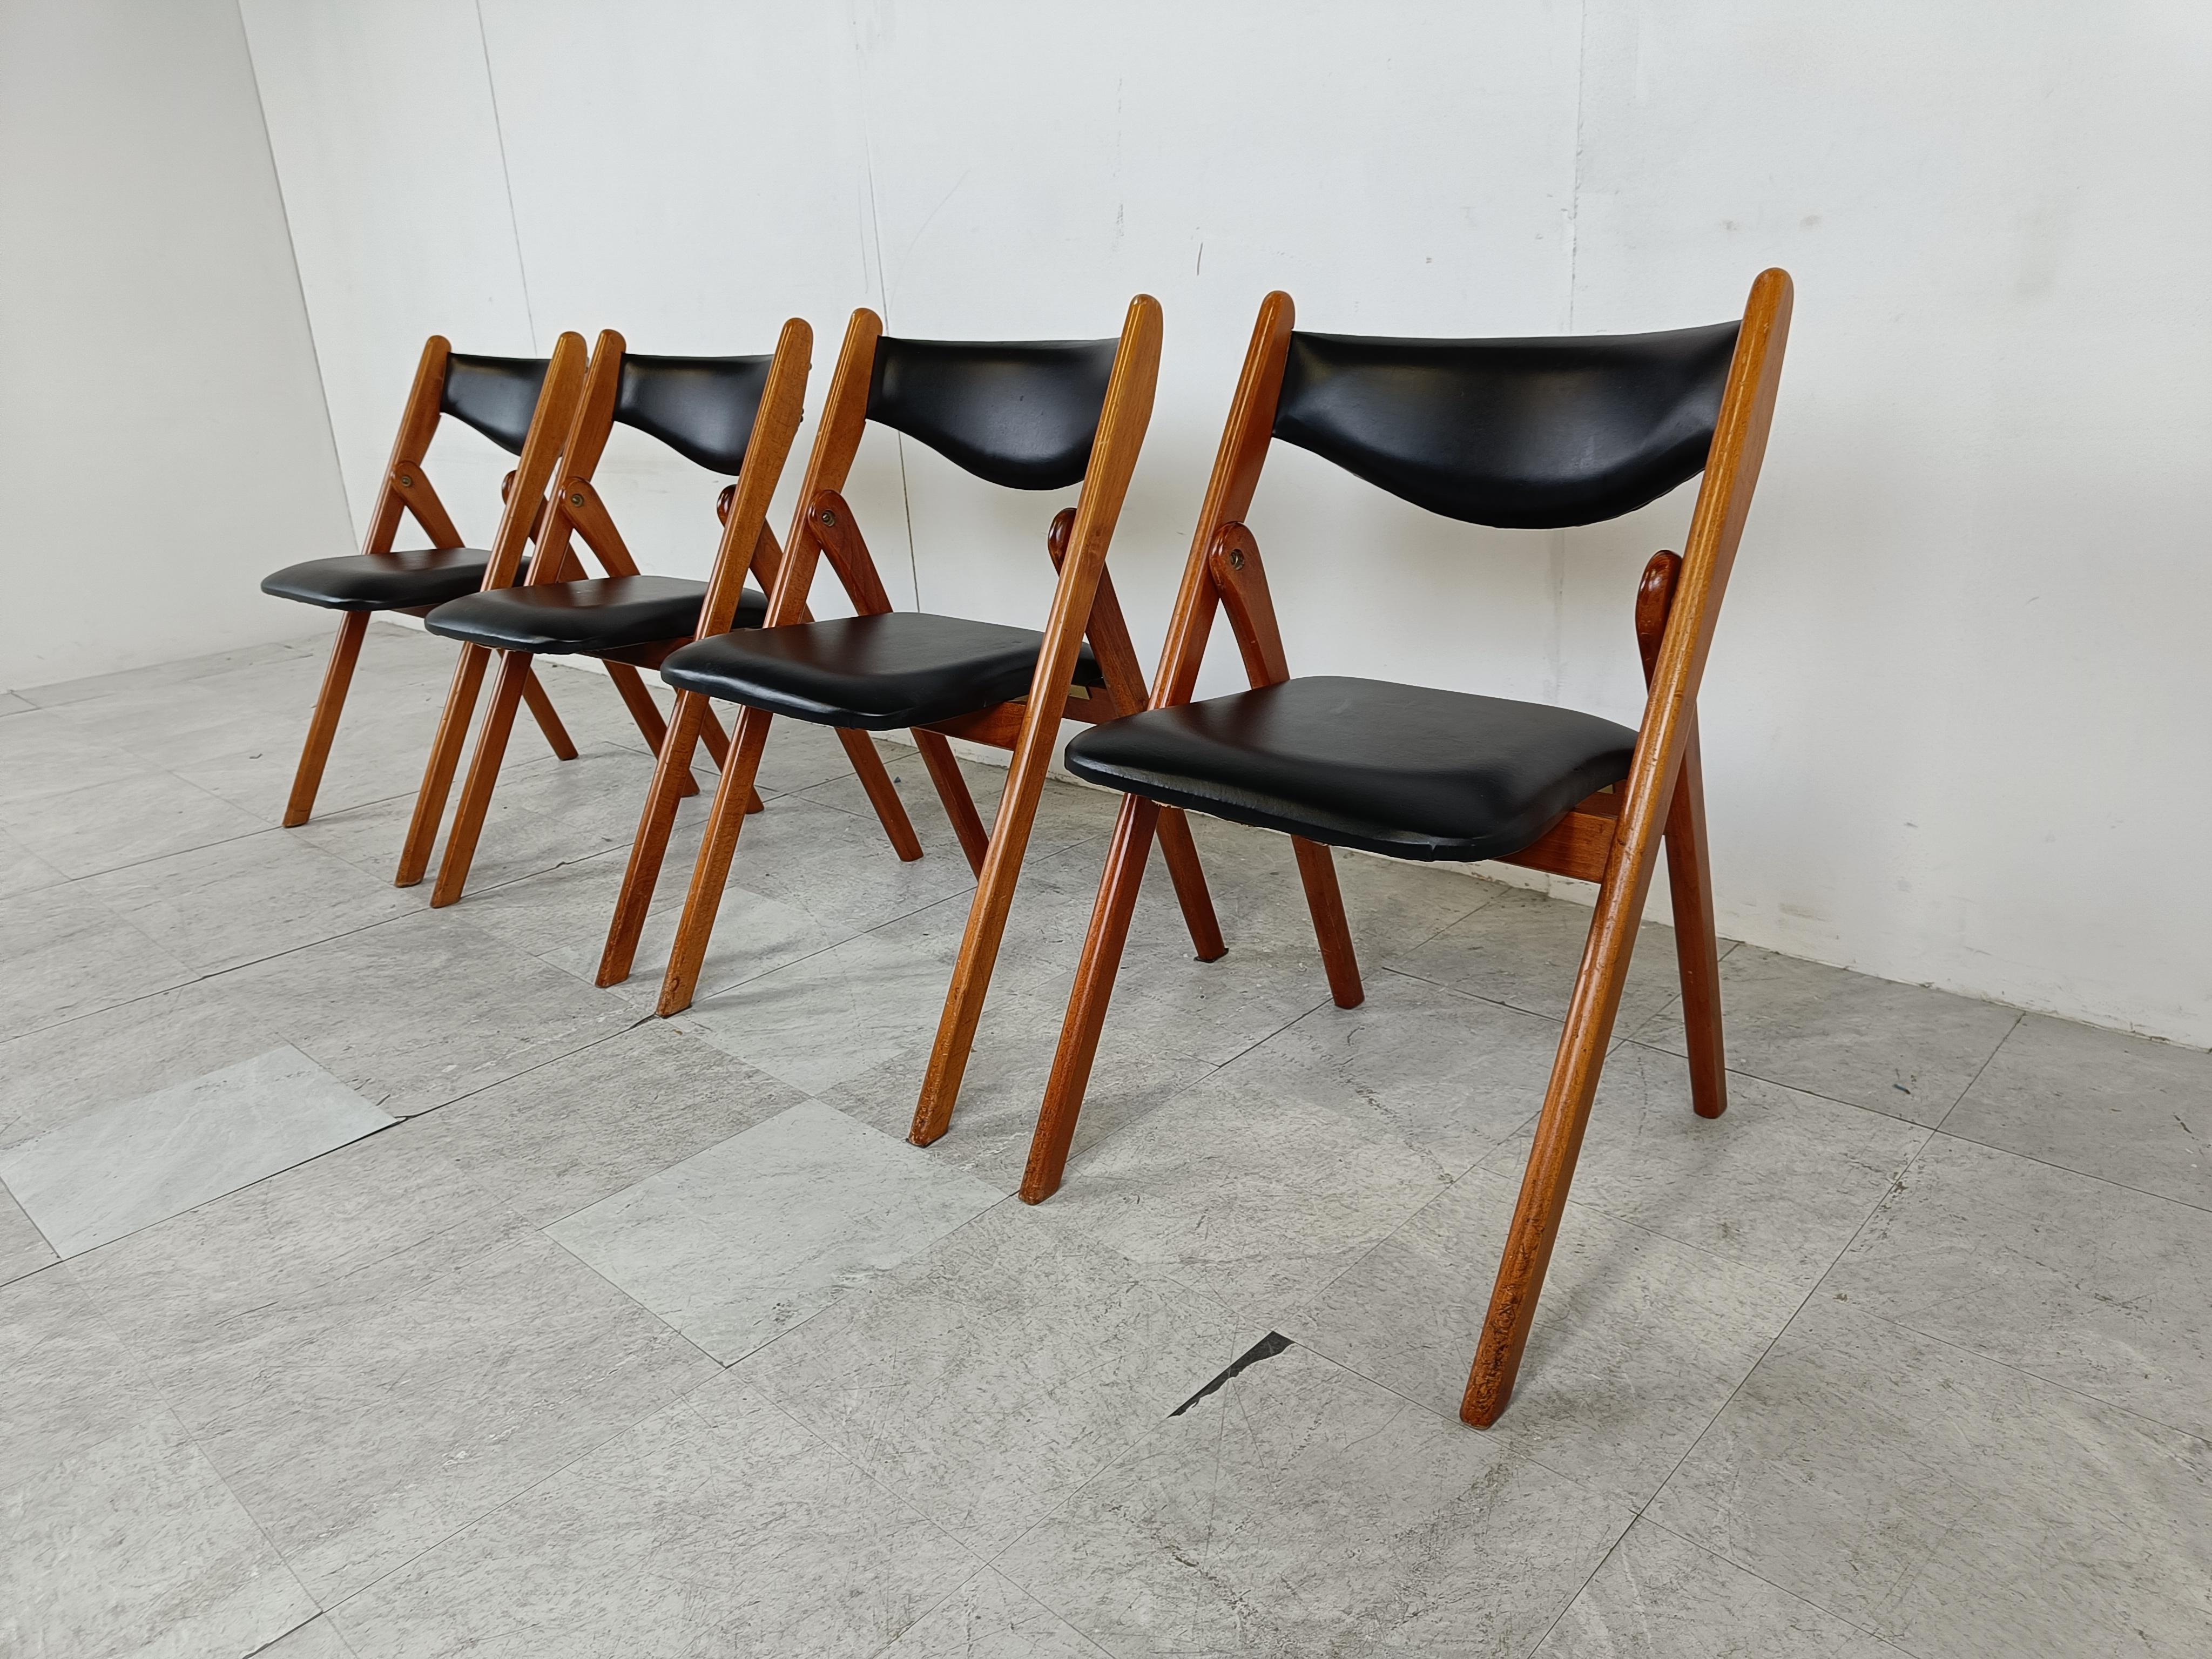 American Midcentury Coronet Folding Chairs from Norquist, 1960s